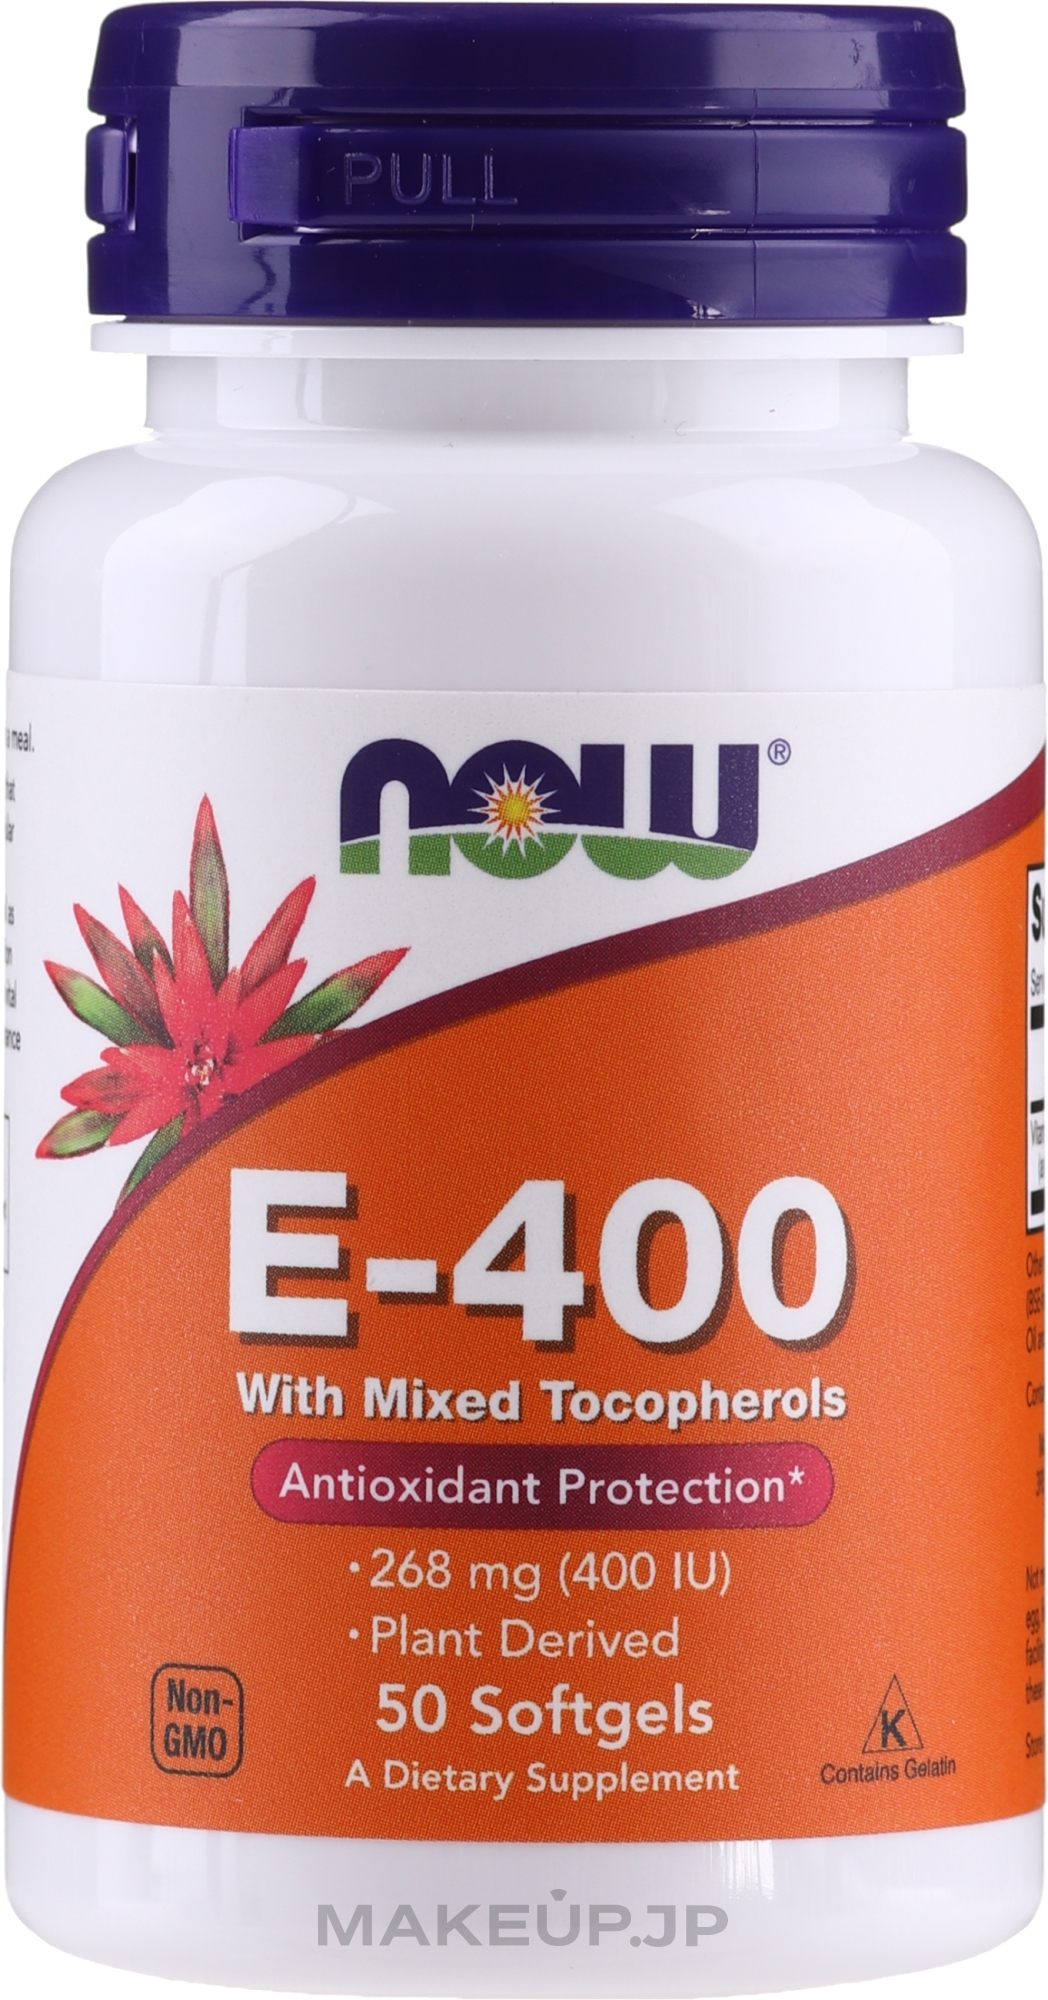 Vetamin E-400 with Mixed Tocopherols, capsules - Now Foods E-400 With Mixed Tocopherols Softgels — photo 50 szt.